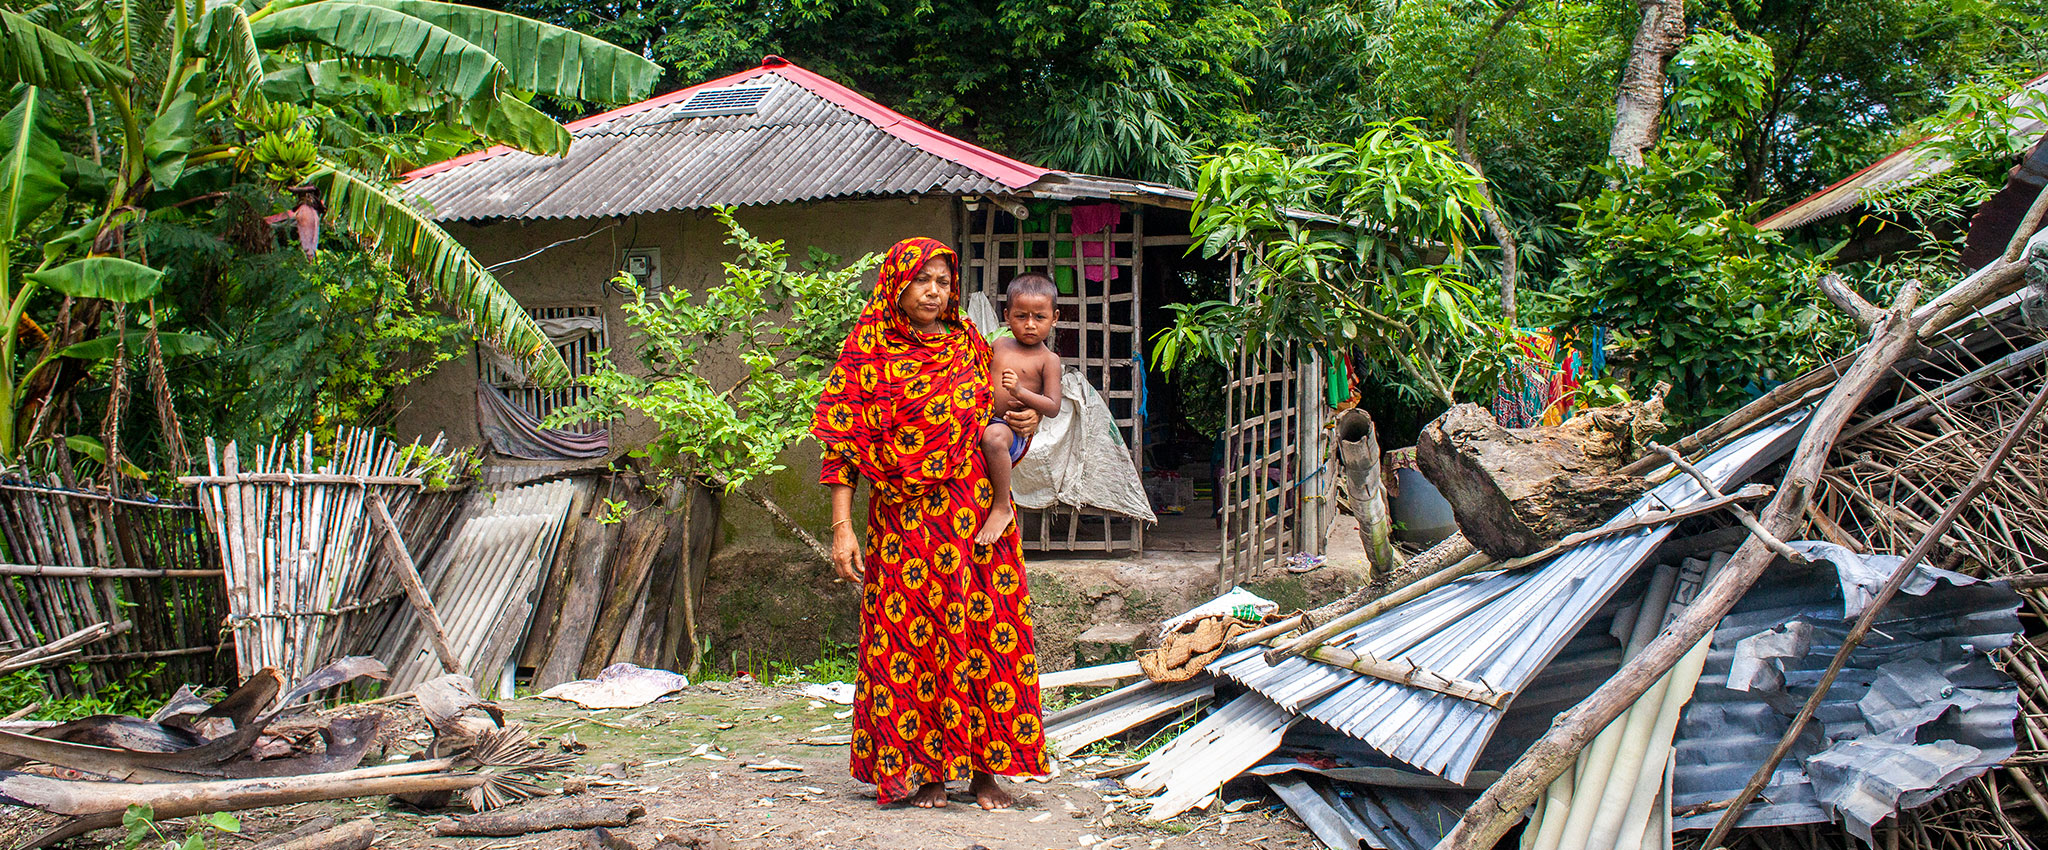 Saleha Begum, 45,  in Patarkhola village of Ramzan Nagar union at Shyamnagar upazila in Satkhira,  stands near some of the remaining damage after the roof of her home was torn off by Cyclone Amphan in 2020.  She received cash support from UN Women following the cyclone, which compounded the hardships already wrought by the COVID-19 pandemic. Photo: UN Women/Fahad Kaizer